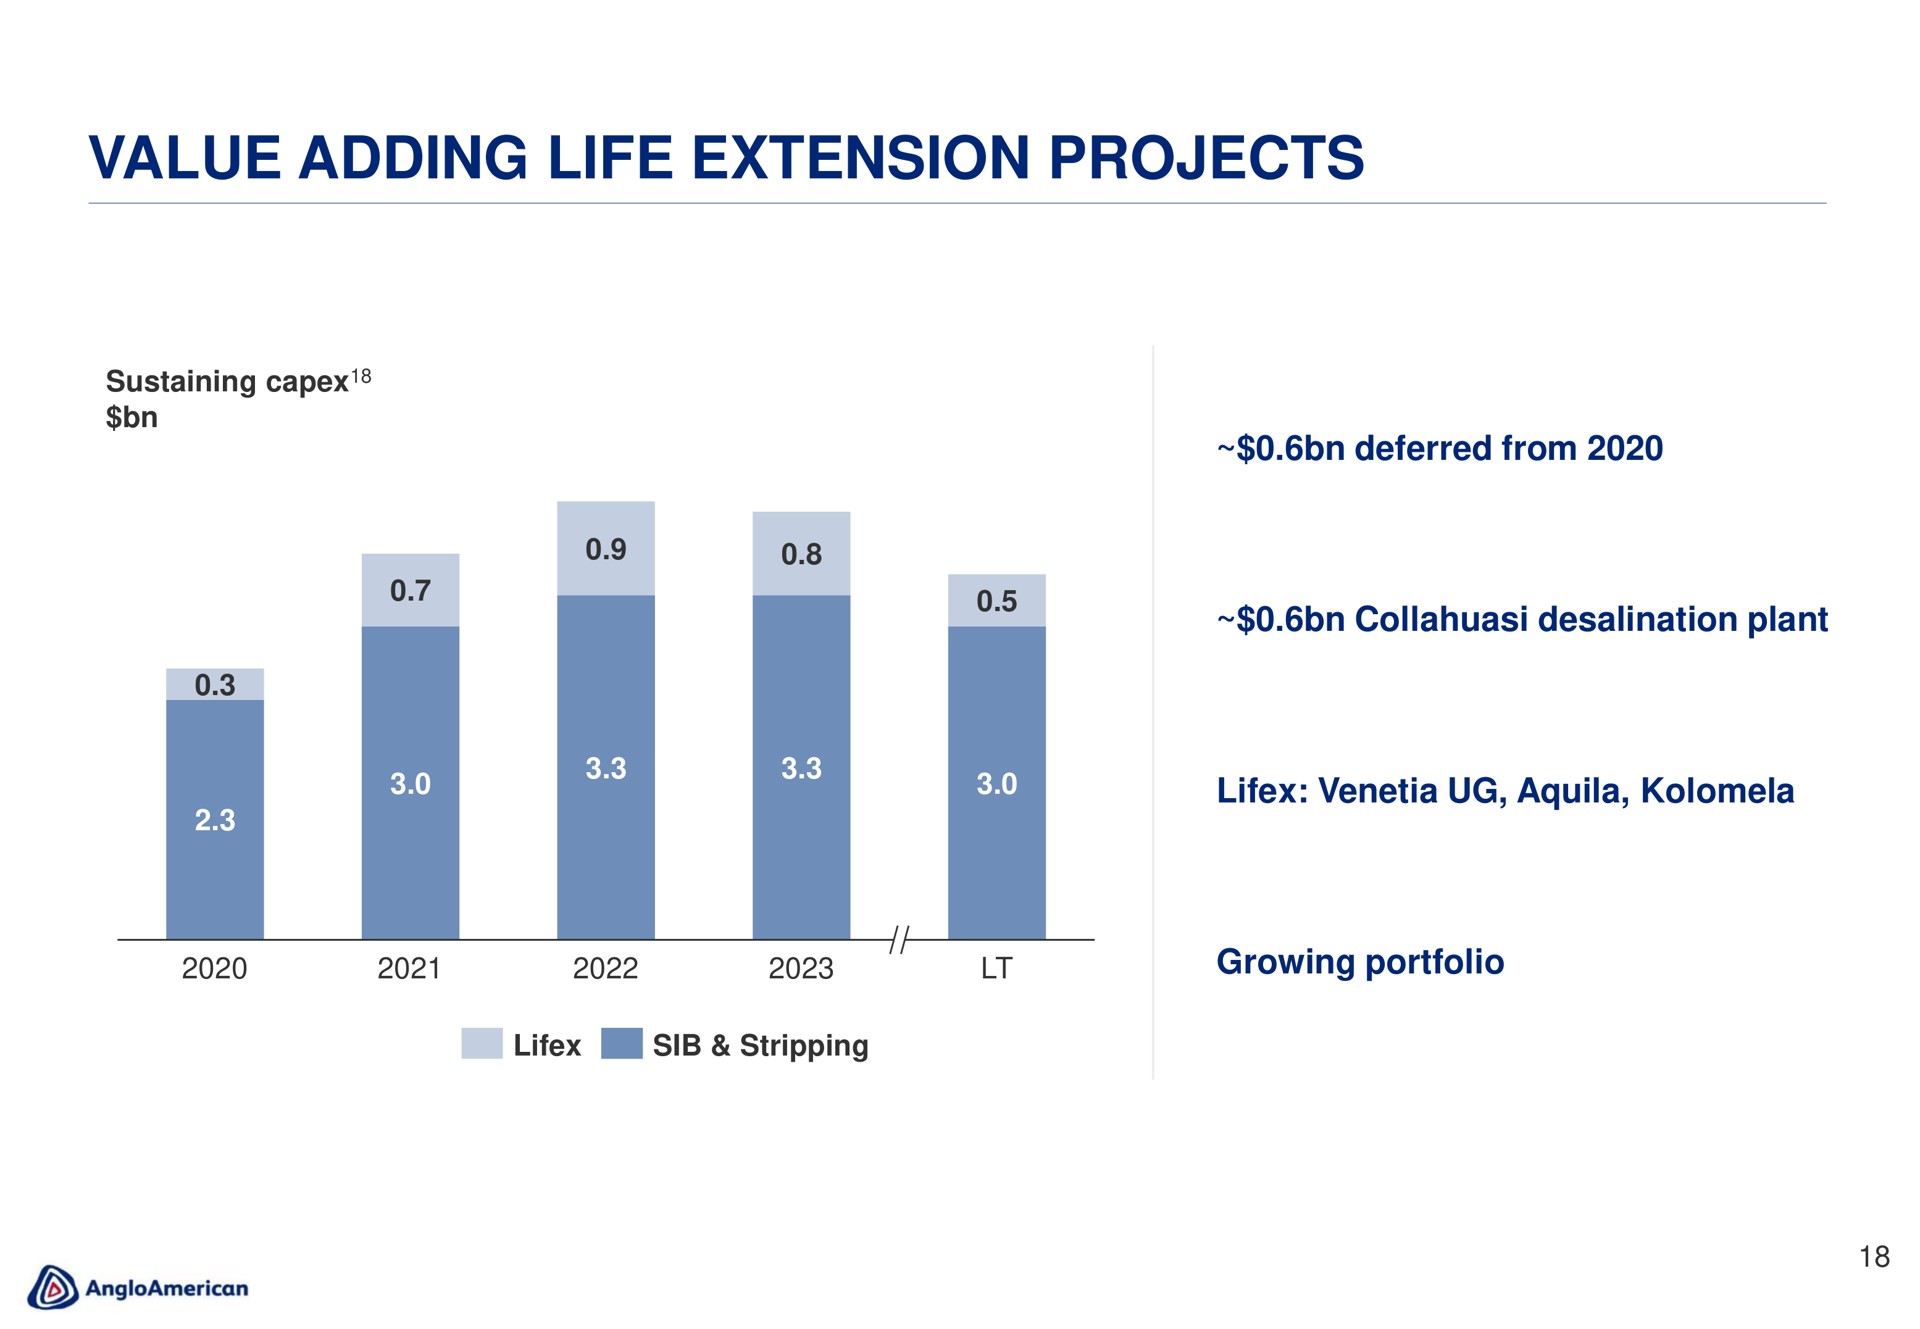 value adding life extension projects | AngloAmerican